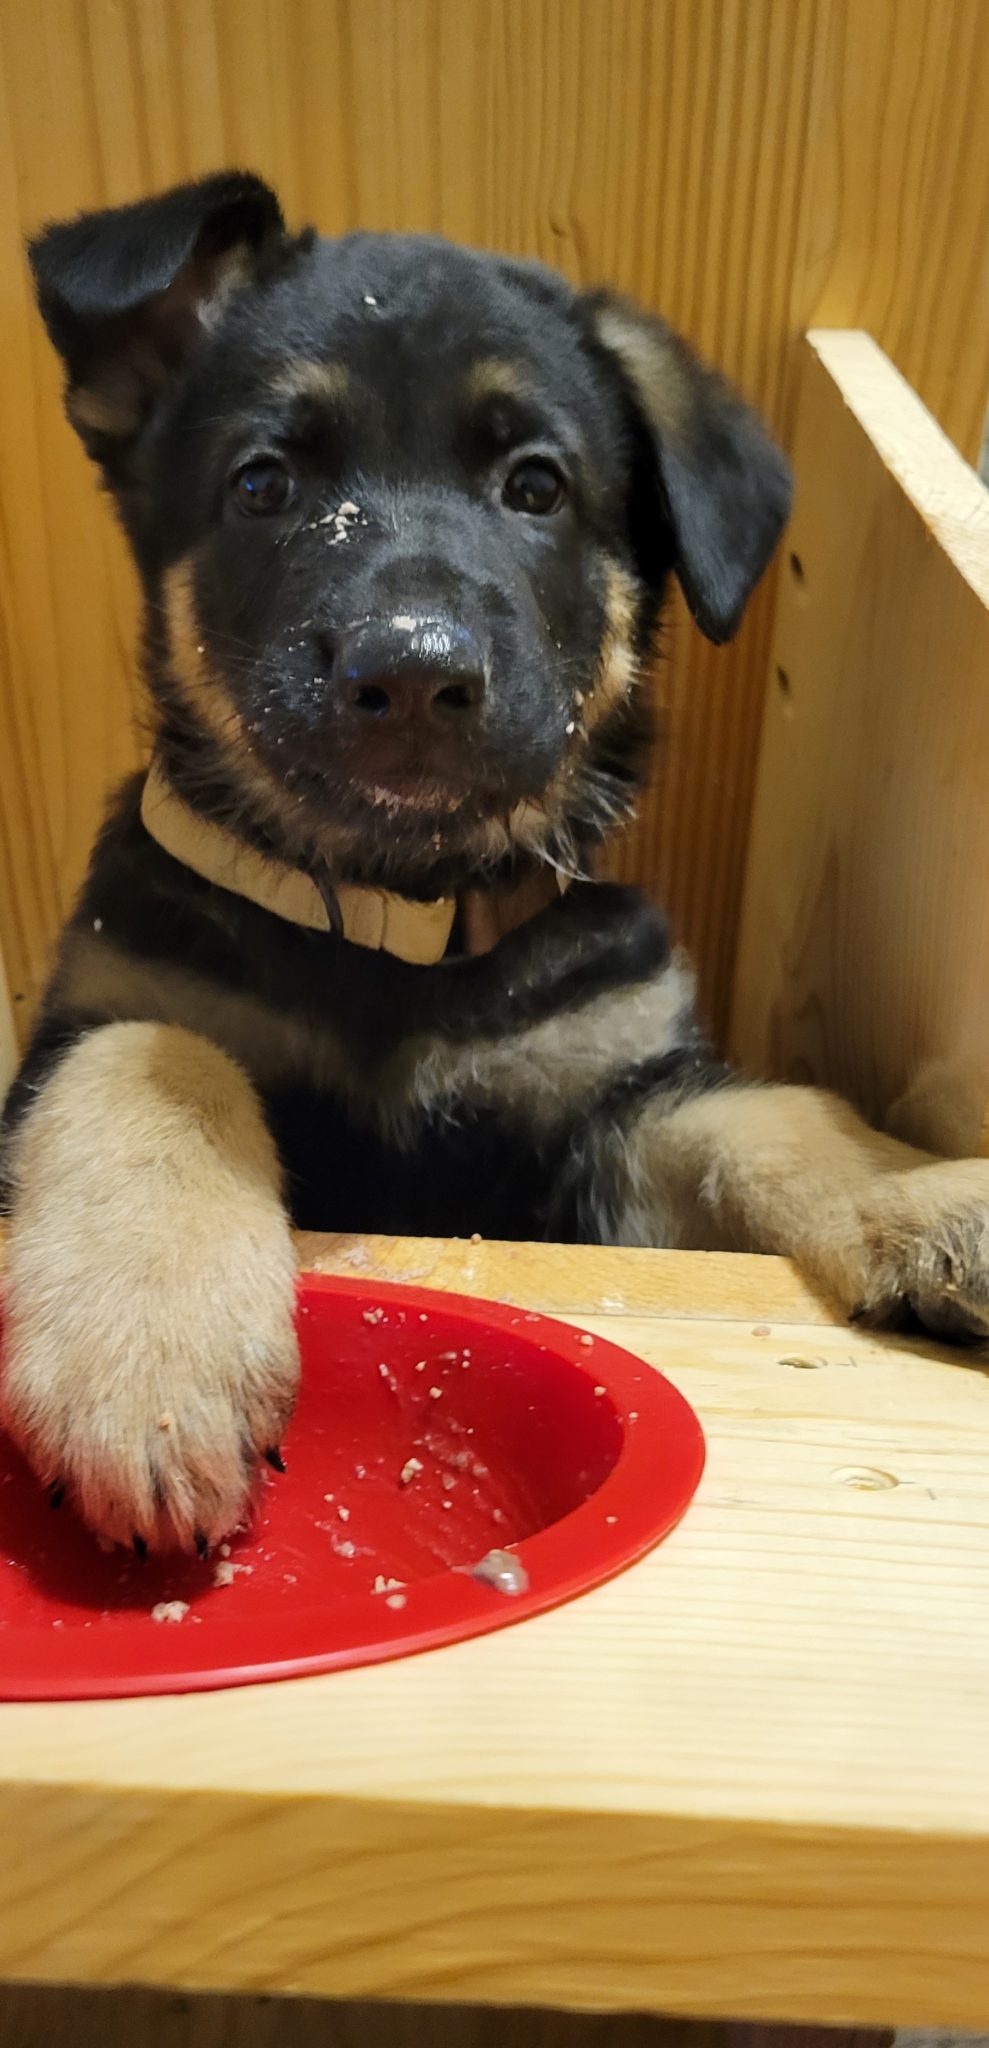 A German Shepherd dog puppy sits upright in a chair to eat